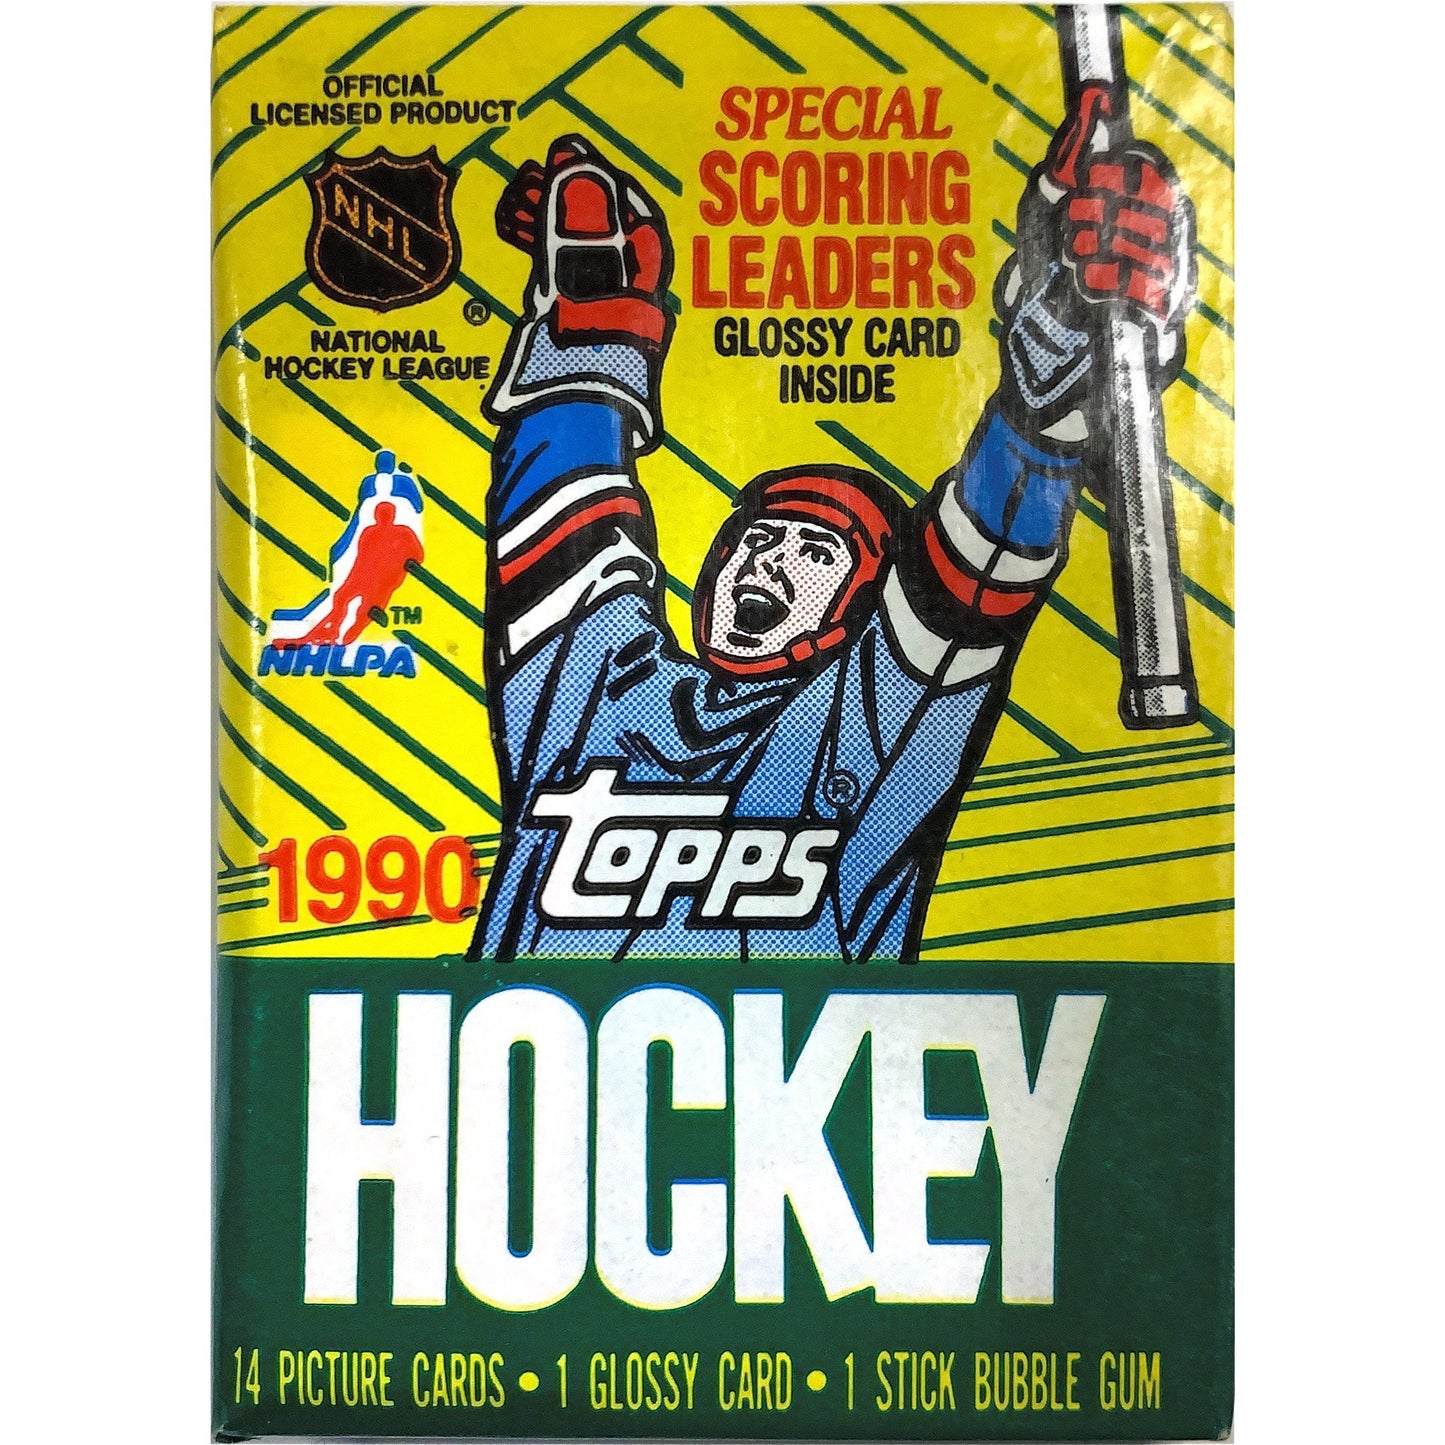  1990 Topps Hockey Wax Pack  Local Legends Cards & Collectibles